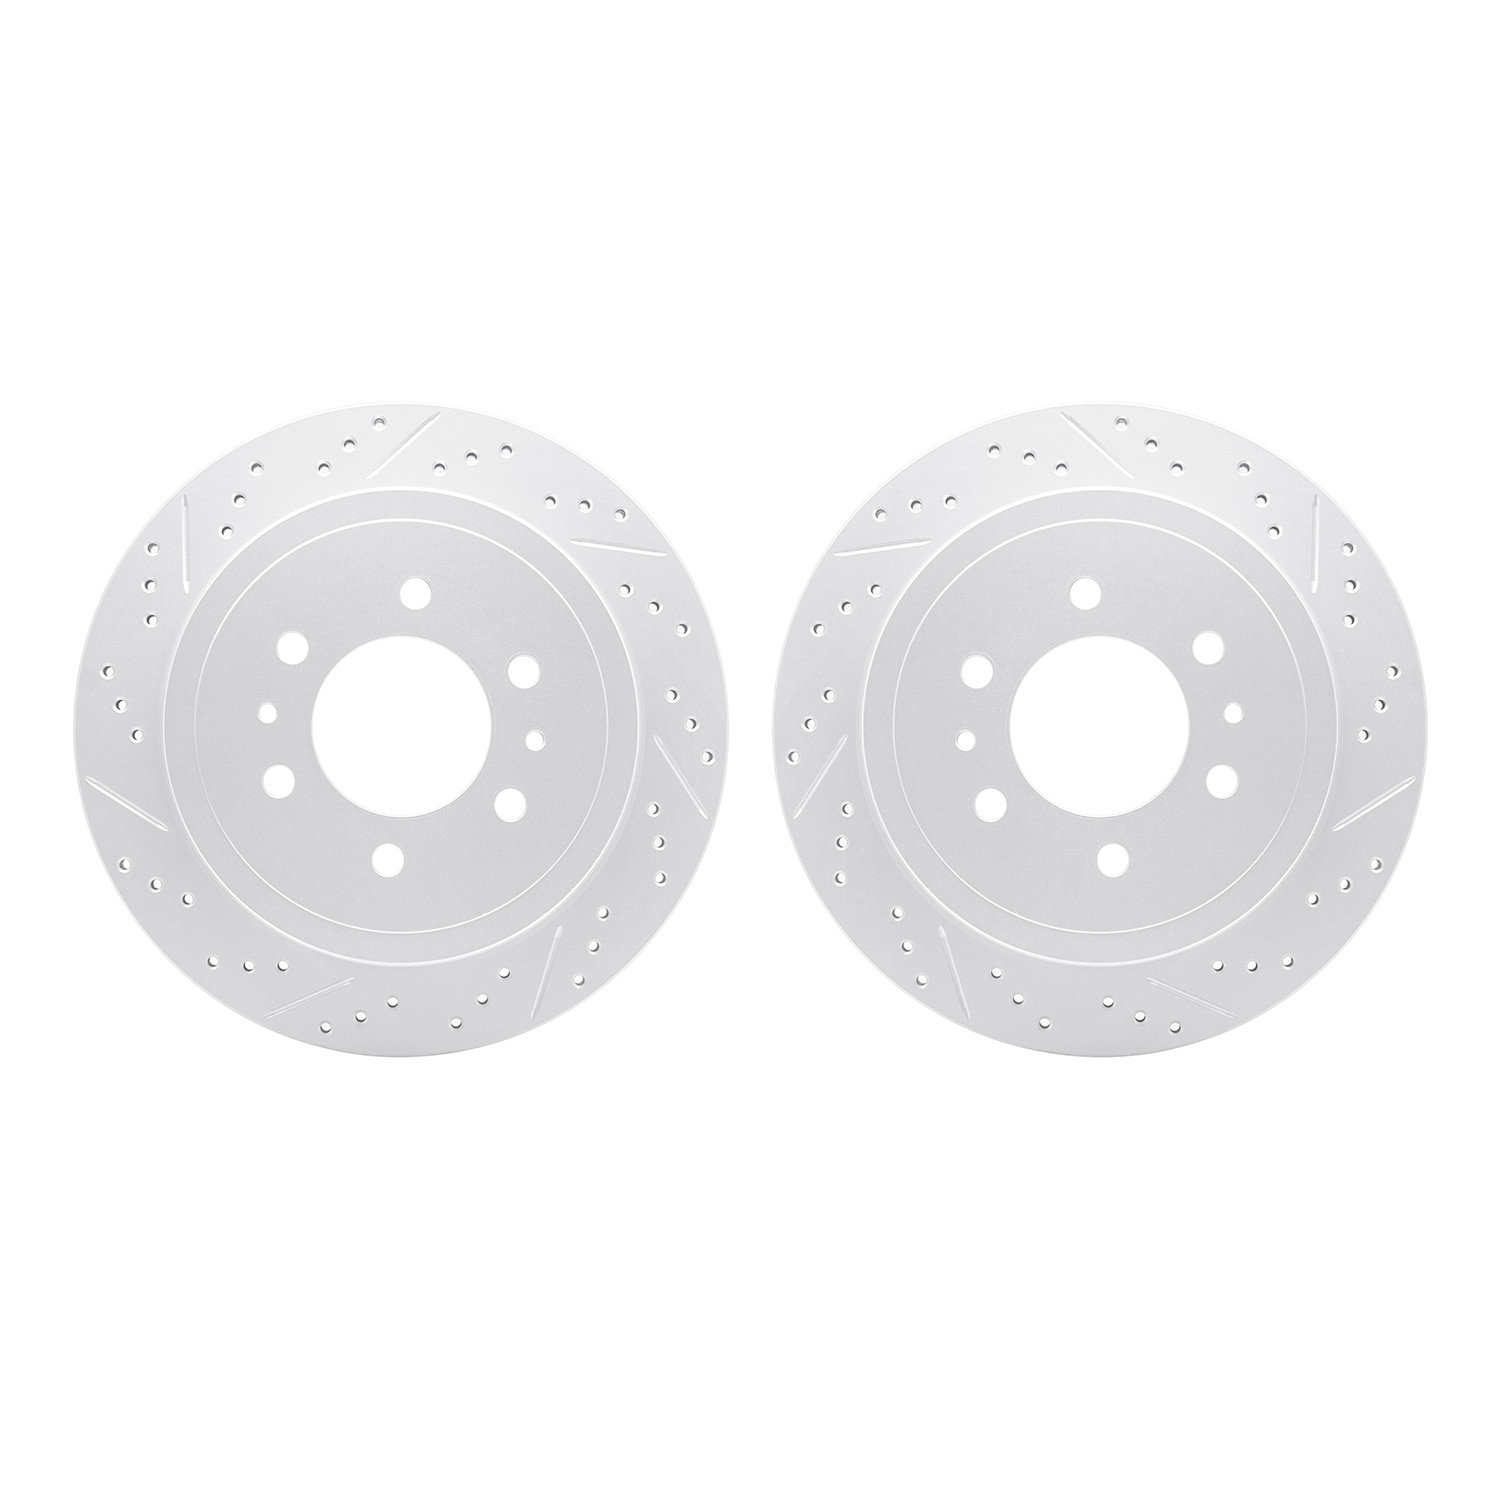 2002-54146 Geoperformance Drilled/Slotted Brake Rotors, 2004-2011 Ford/Lincoln/Mercury/Mazda, Position: Rear